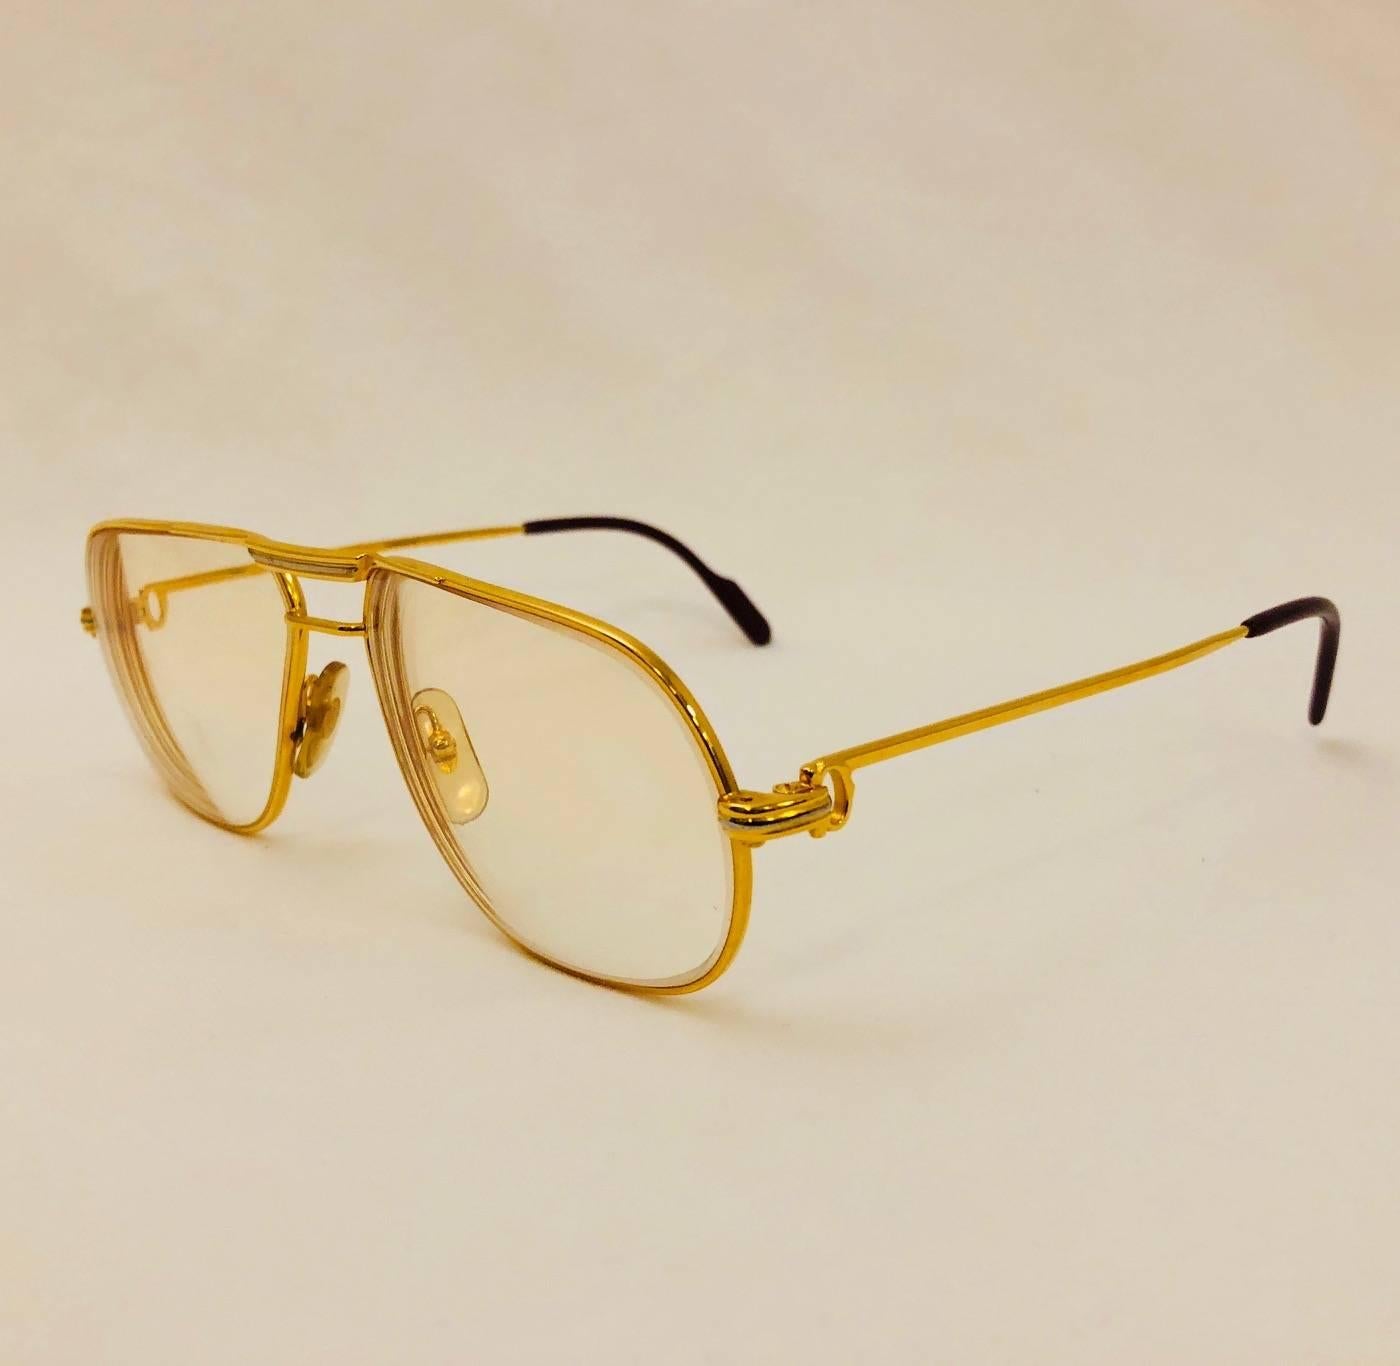 Vintage Cartier Vendome Glasses are highly desired by all connoisseurs of fine eyewear in general and Cartier in particular!     Features gold larger frame, signature temple adornment, and iconic logo temple tips.  Clear Prescription Lenses can be